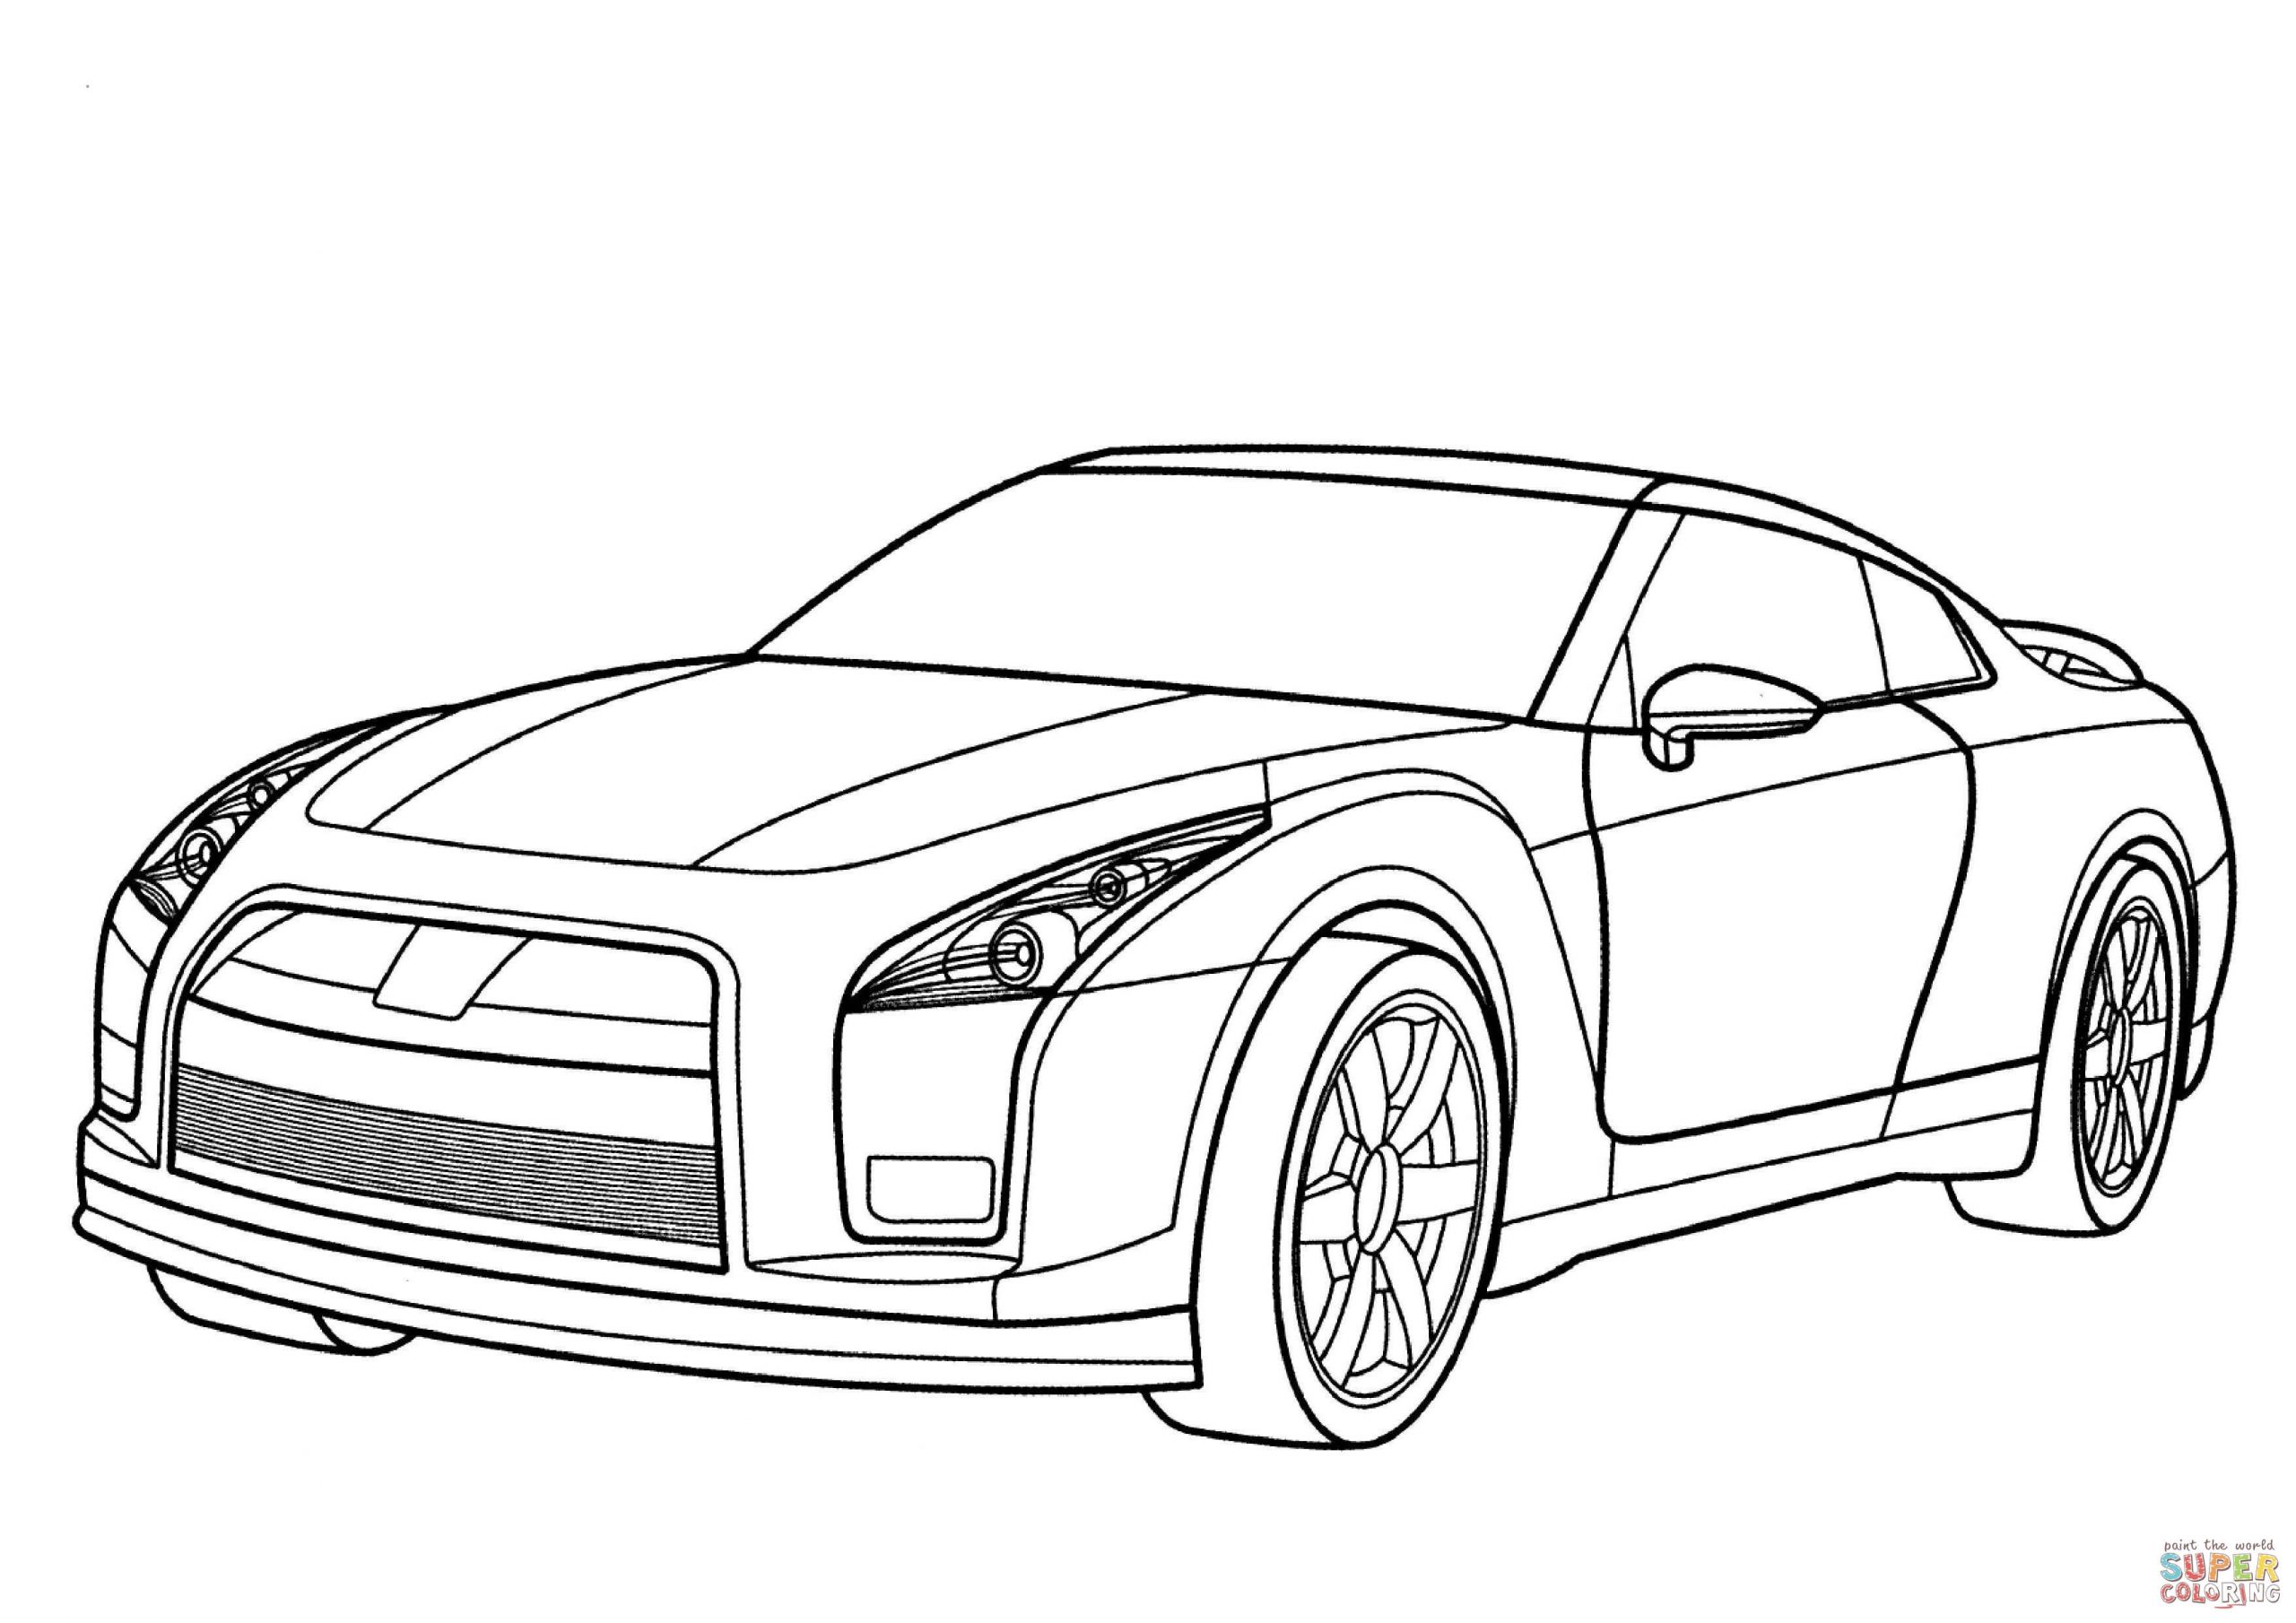 Coloring Pages : Stunning Gtr Coloring Pages Liberty Walk Nissan Gtr Coloring  Pages‚ Google Docs‚ Coloring Pages To Print also Coloring Pagess